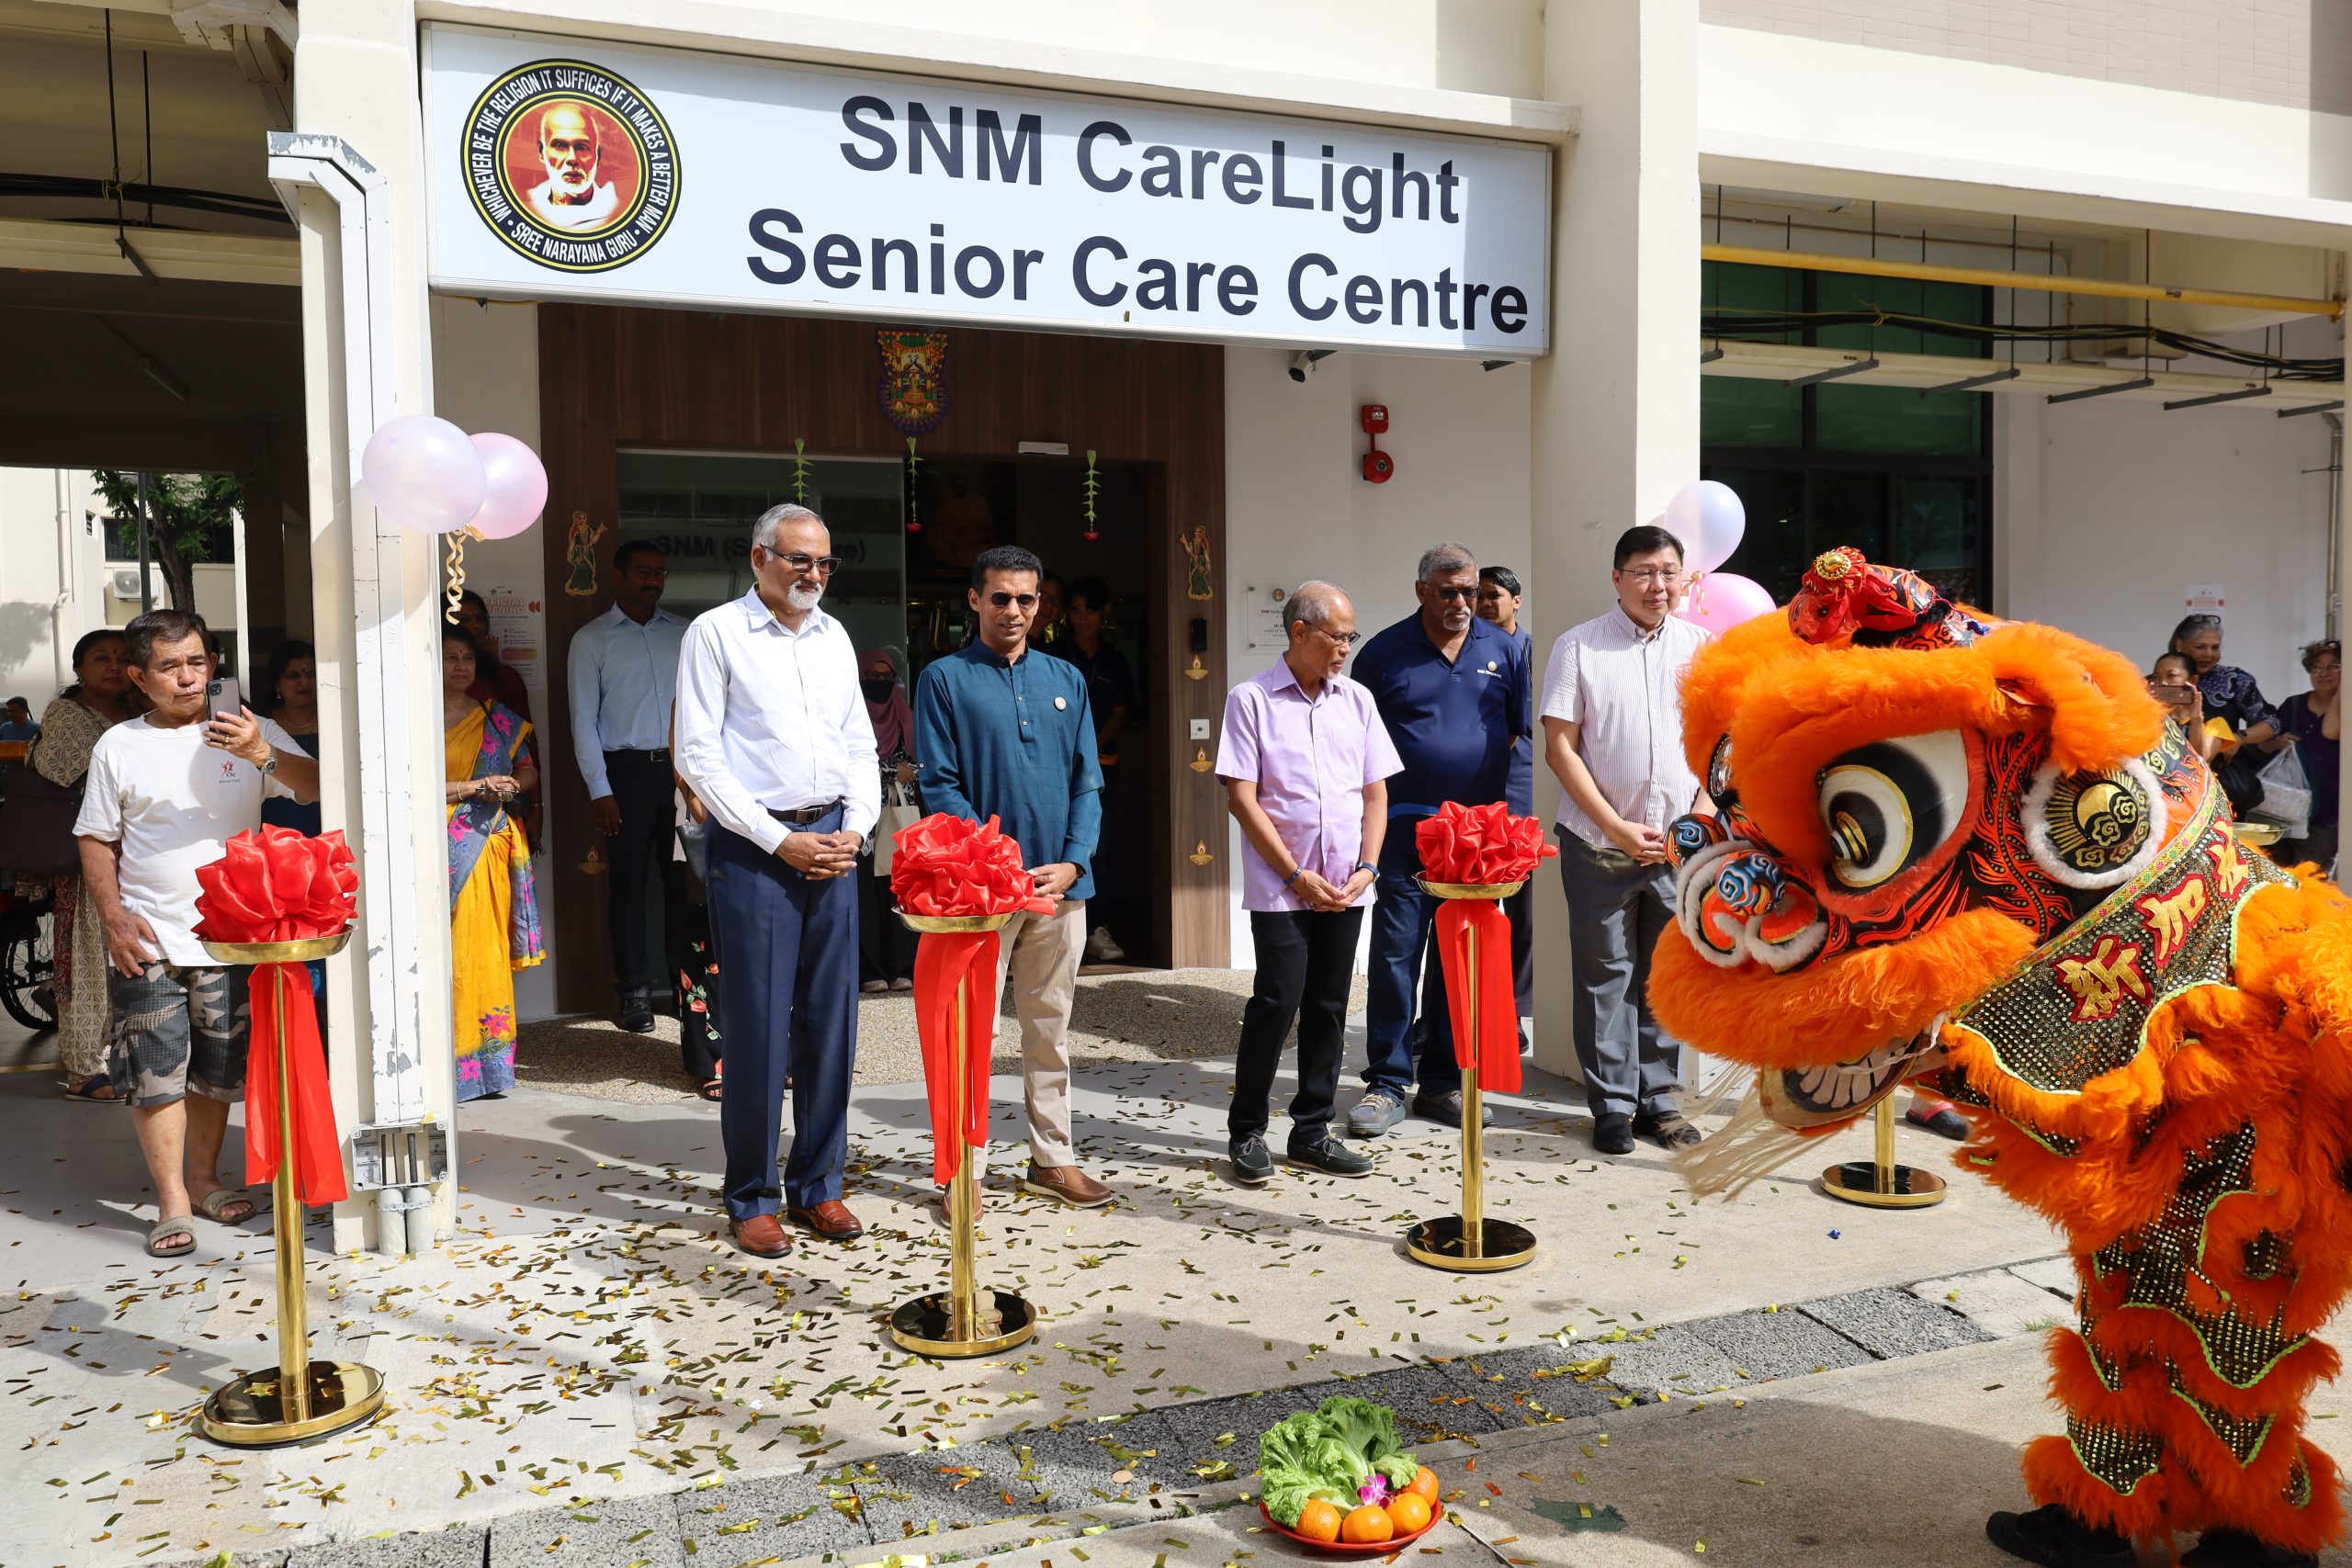 The grand opening of SNM Carelight Senior Care Centre!